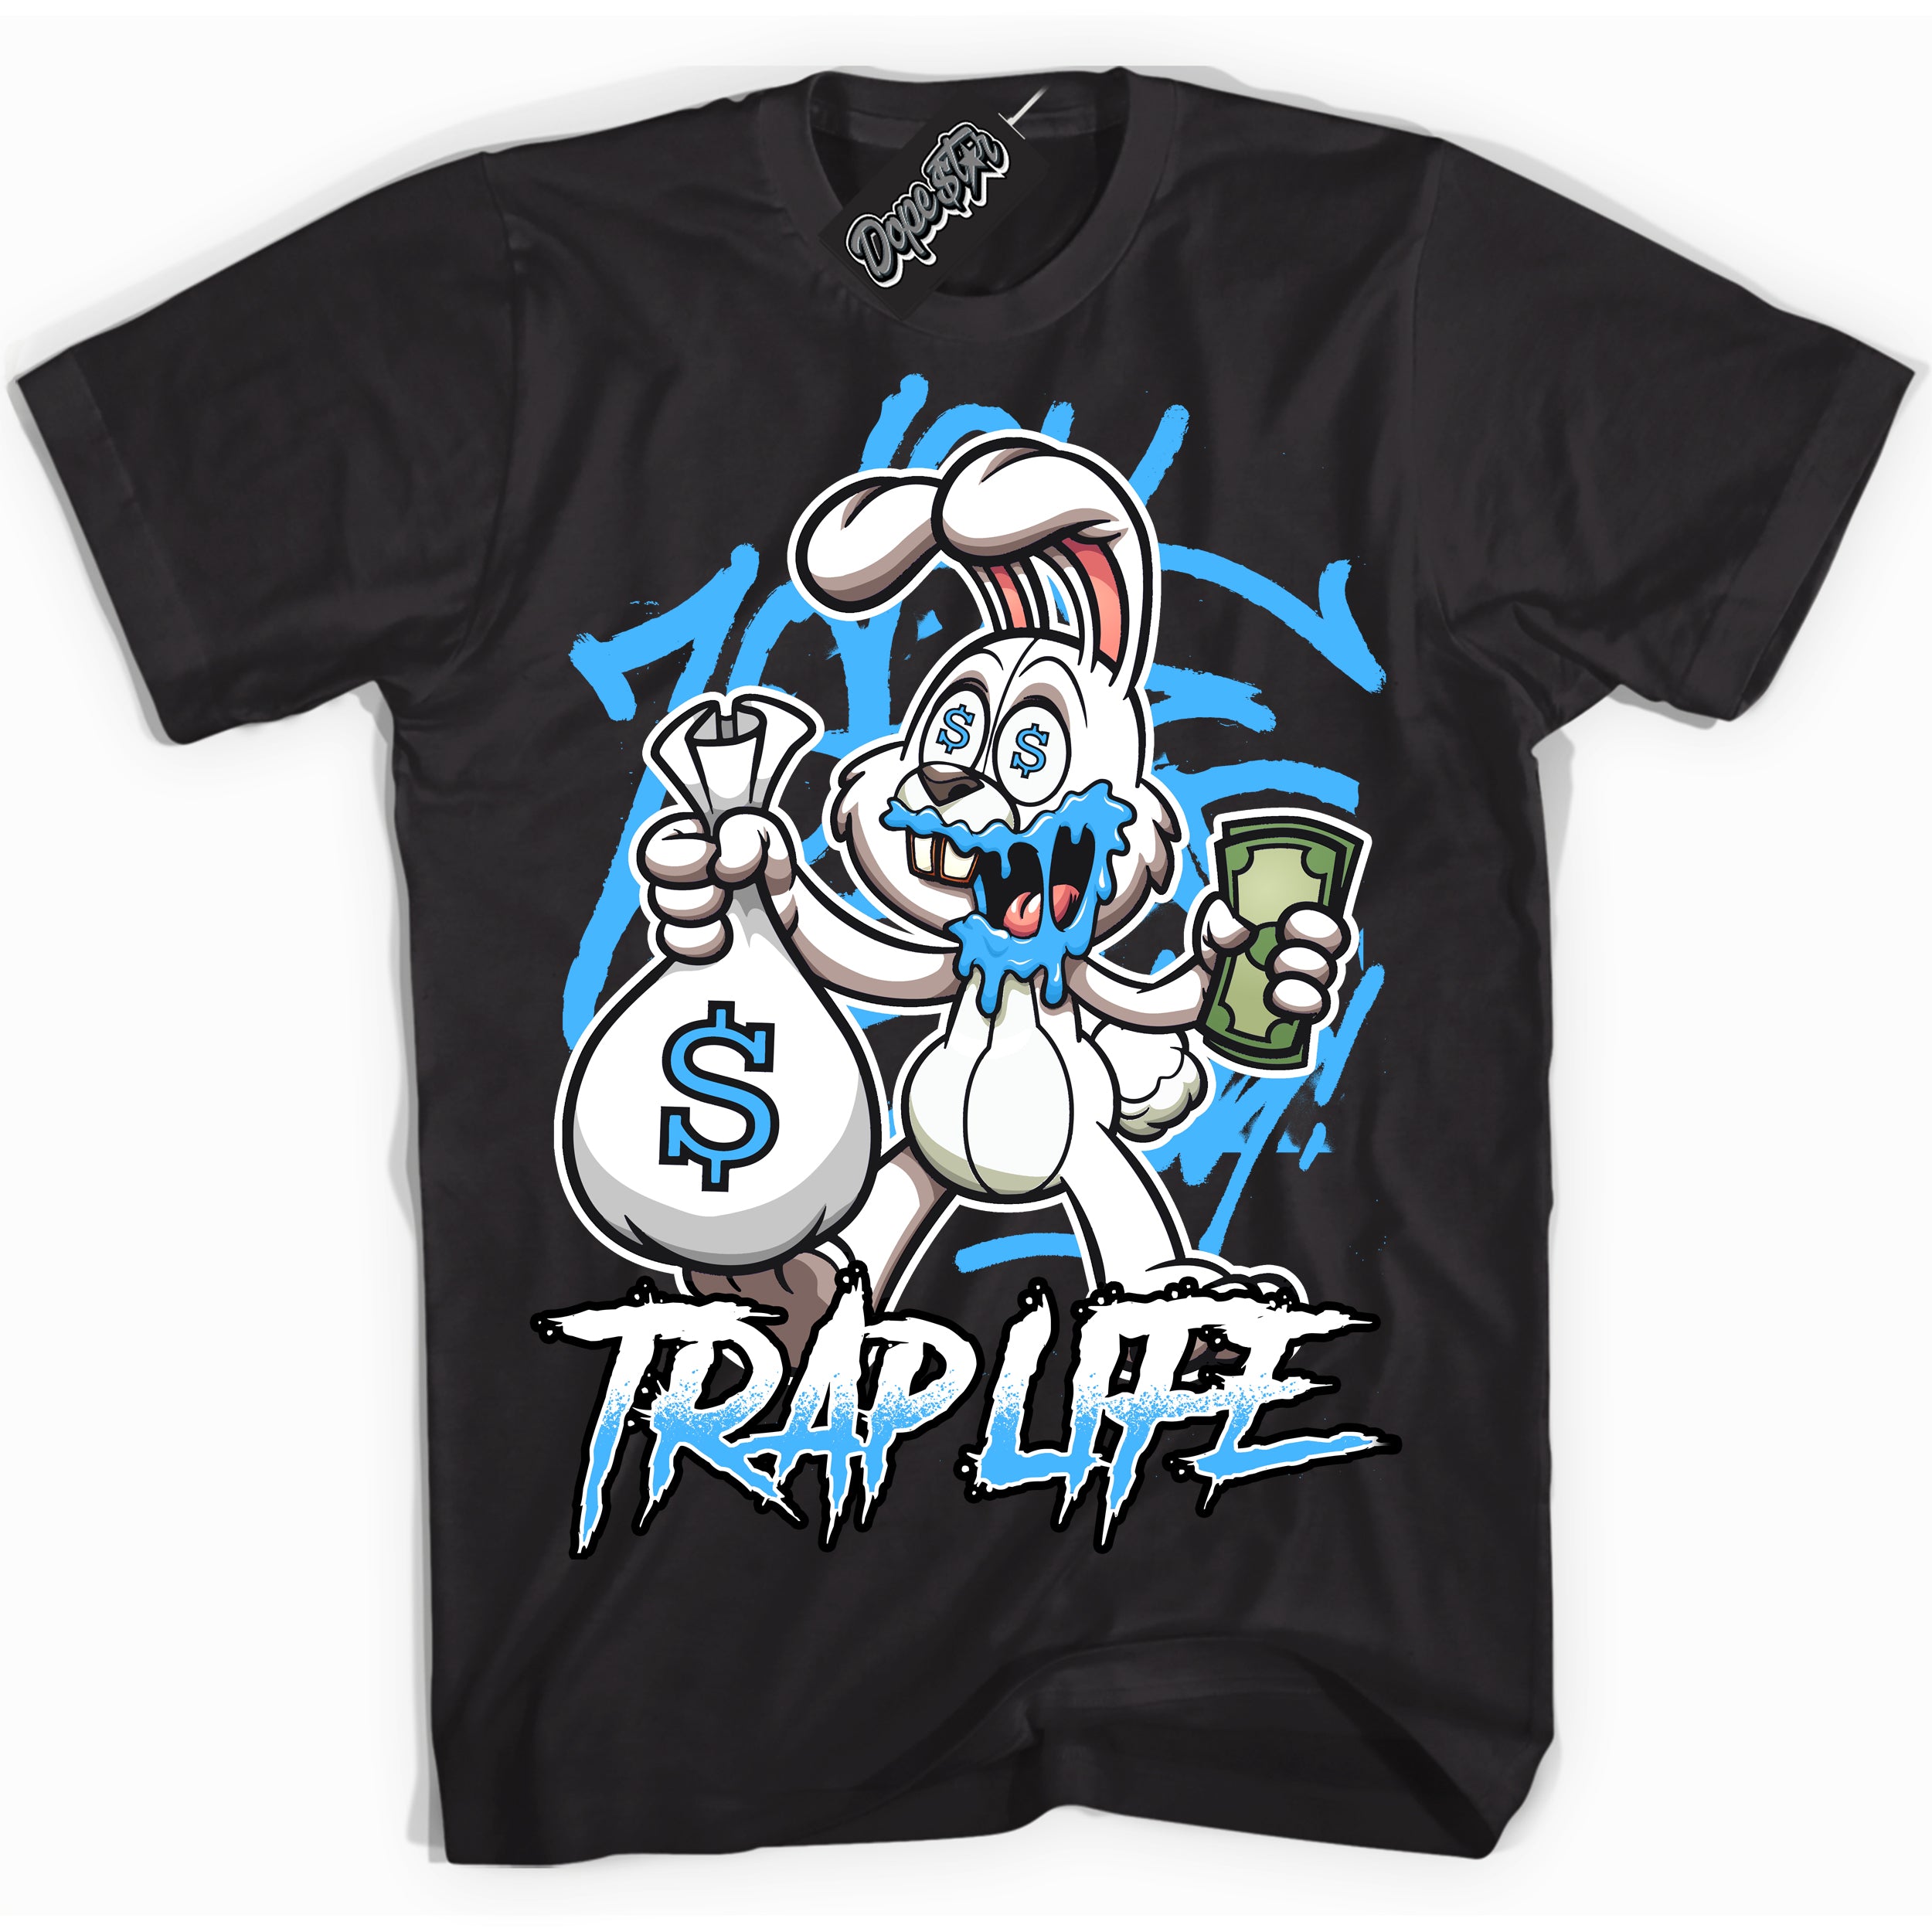 Cool Black graphic tee with “ Trap Rabbit ” design, that perfectly matches Powder Blue 9s sneakers 